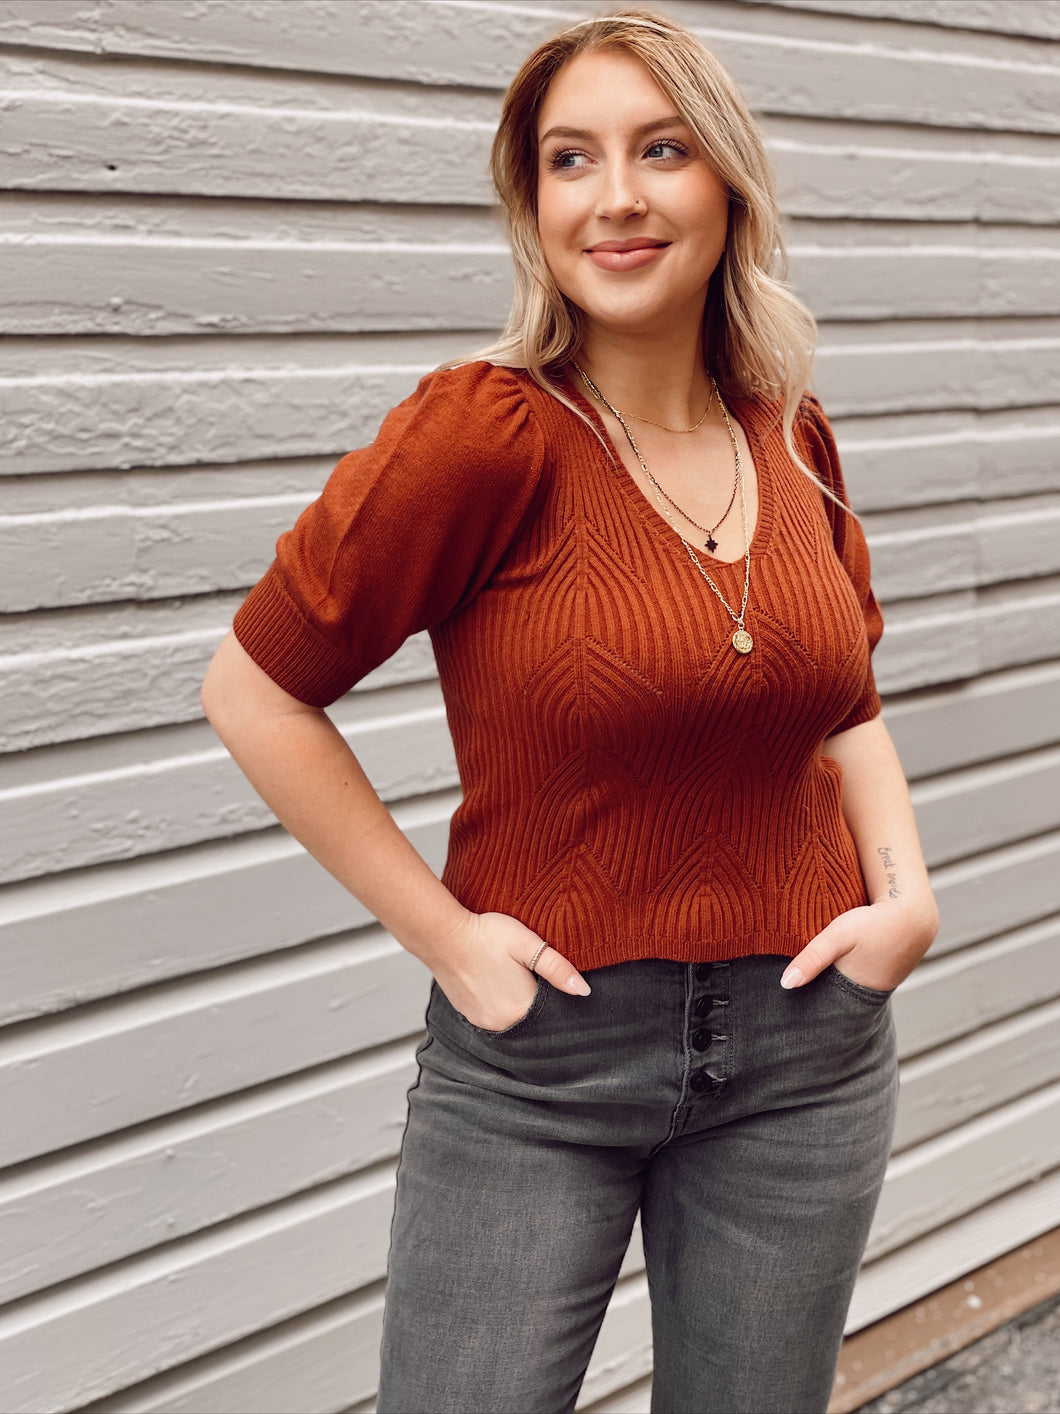 Long Story Short Sweater Top in Spice